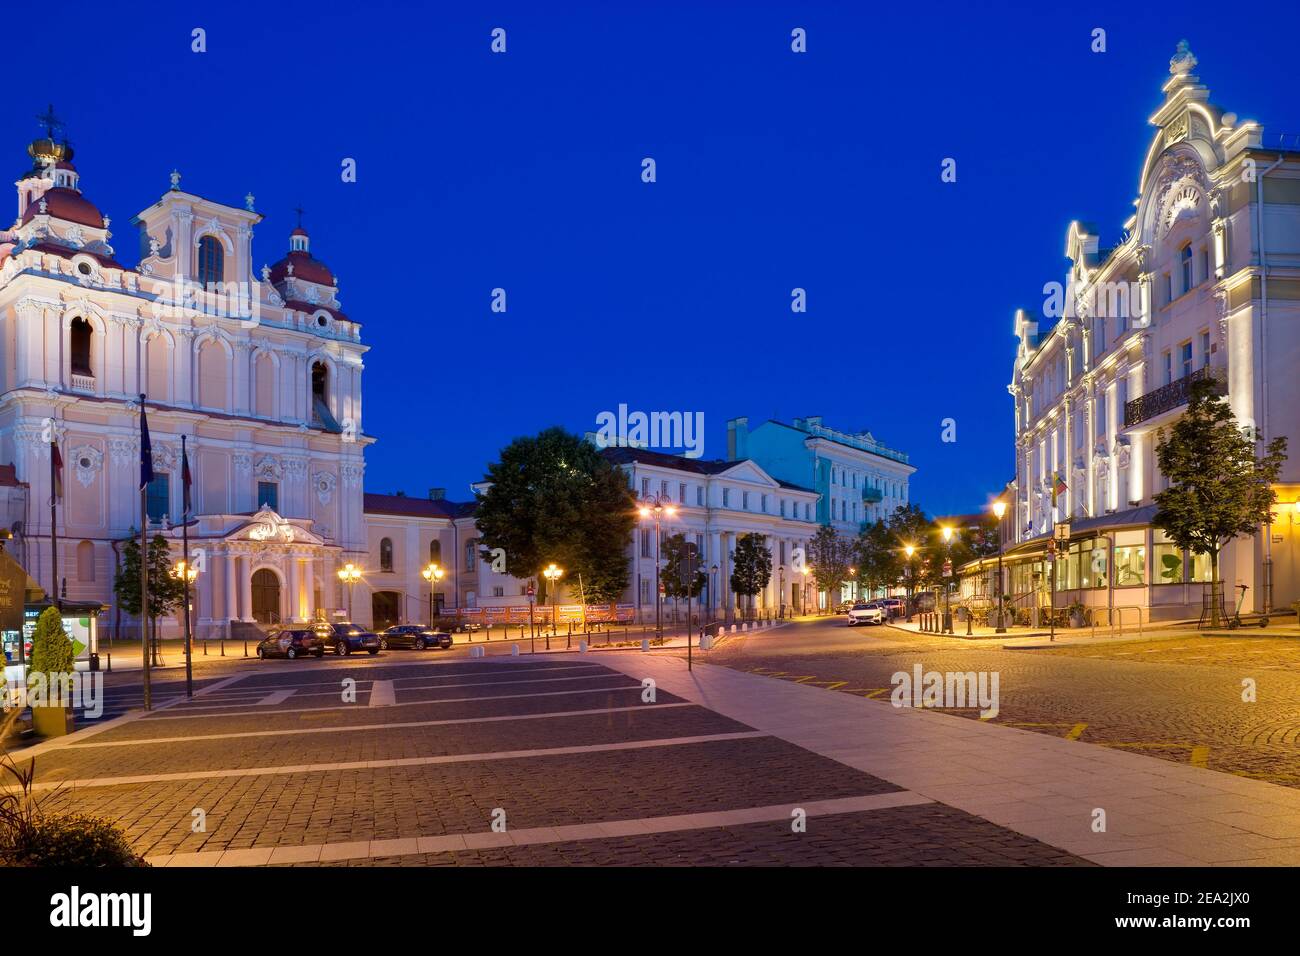 Night view of illuminated church of St. Casimir and Astorija hotel in the Old Town of Vilnius, Lithuania Stock Photo